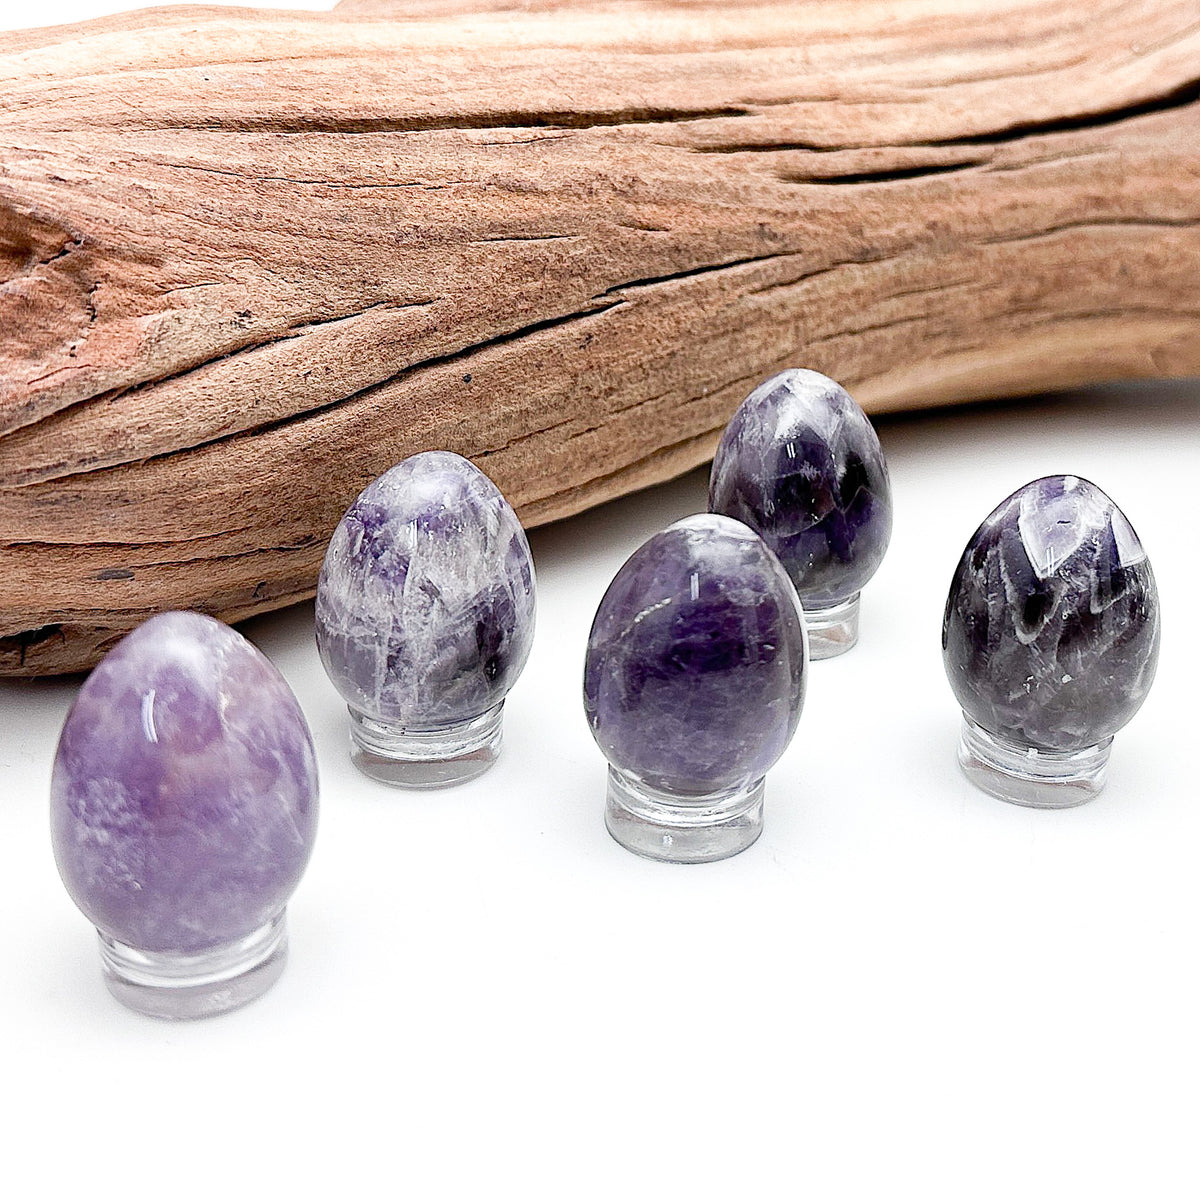 Amethyst eggs of various hues and patterns laid out together on a white background